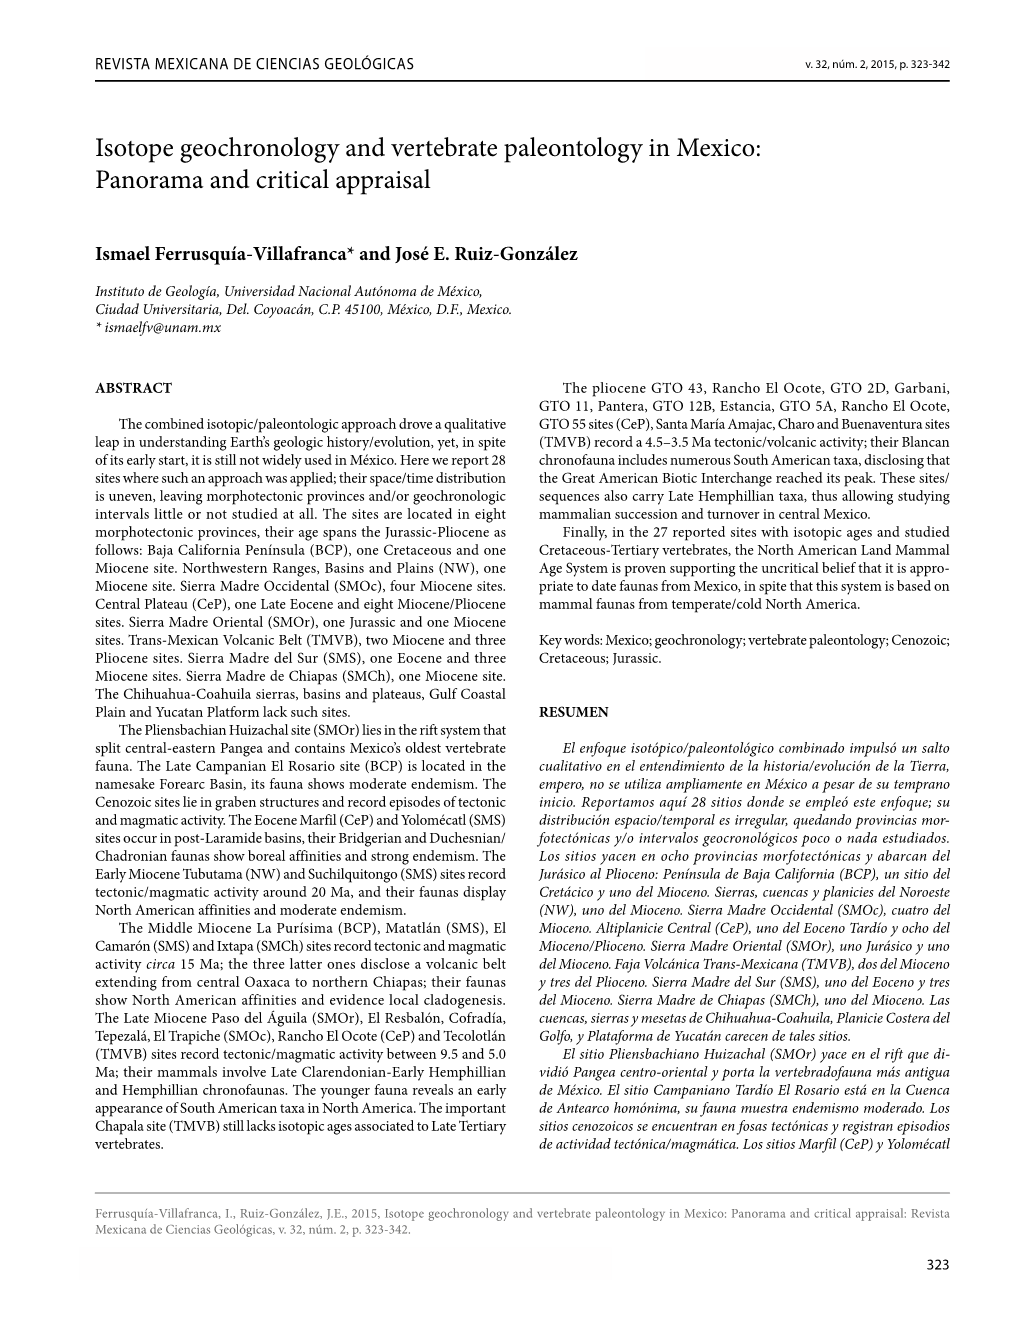 Isotope Geochronology and Vertebrate Paleontology in Mexico: Panorama and Critical Appraisal